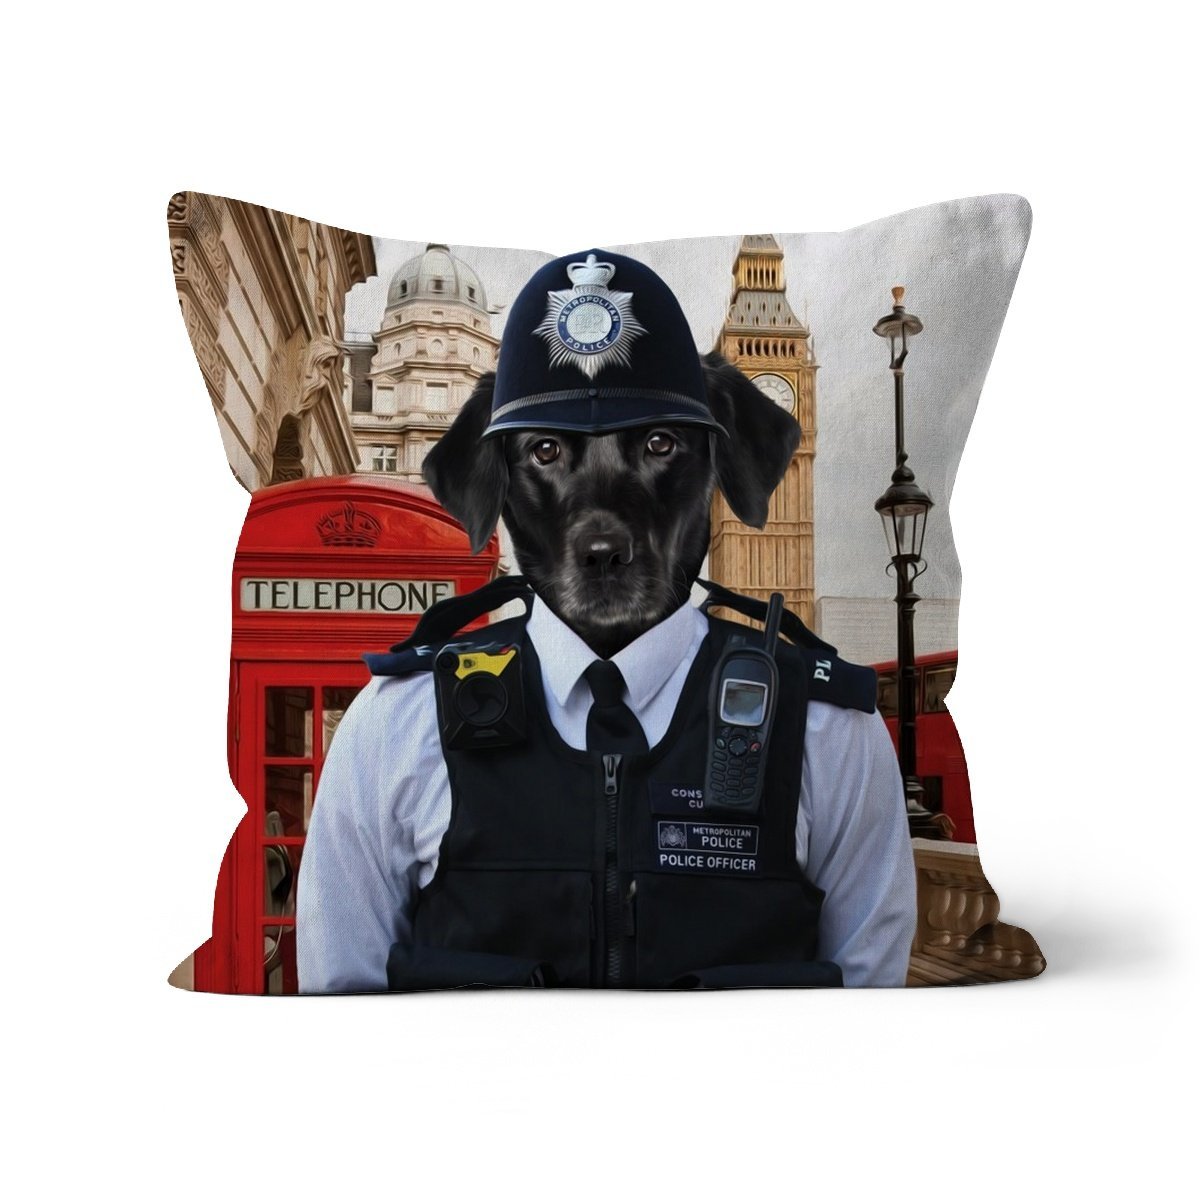 The Constable: Custom Throw Pillow - Paw & Glory - #pet portraits# - #dog portraits# - #pet portraits uk#paw and glory, pet portraits cushion,dog on pillow, pillow with dogs face, custom pillow of your pet, pet pillow, dog pillow cases, pillows of your dog